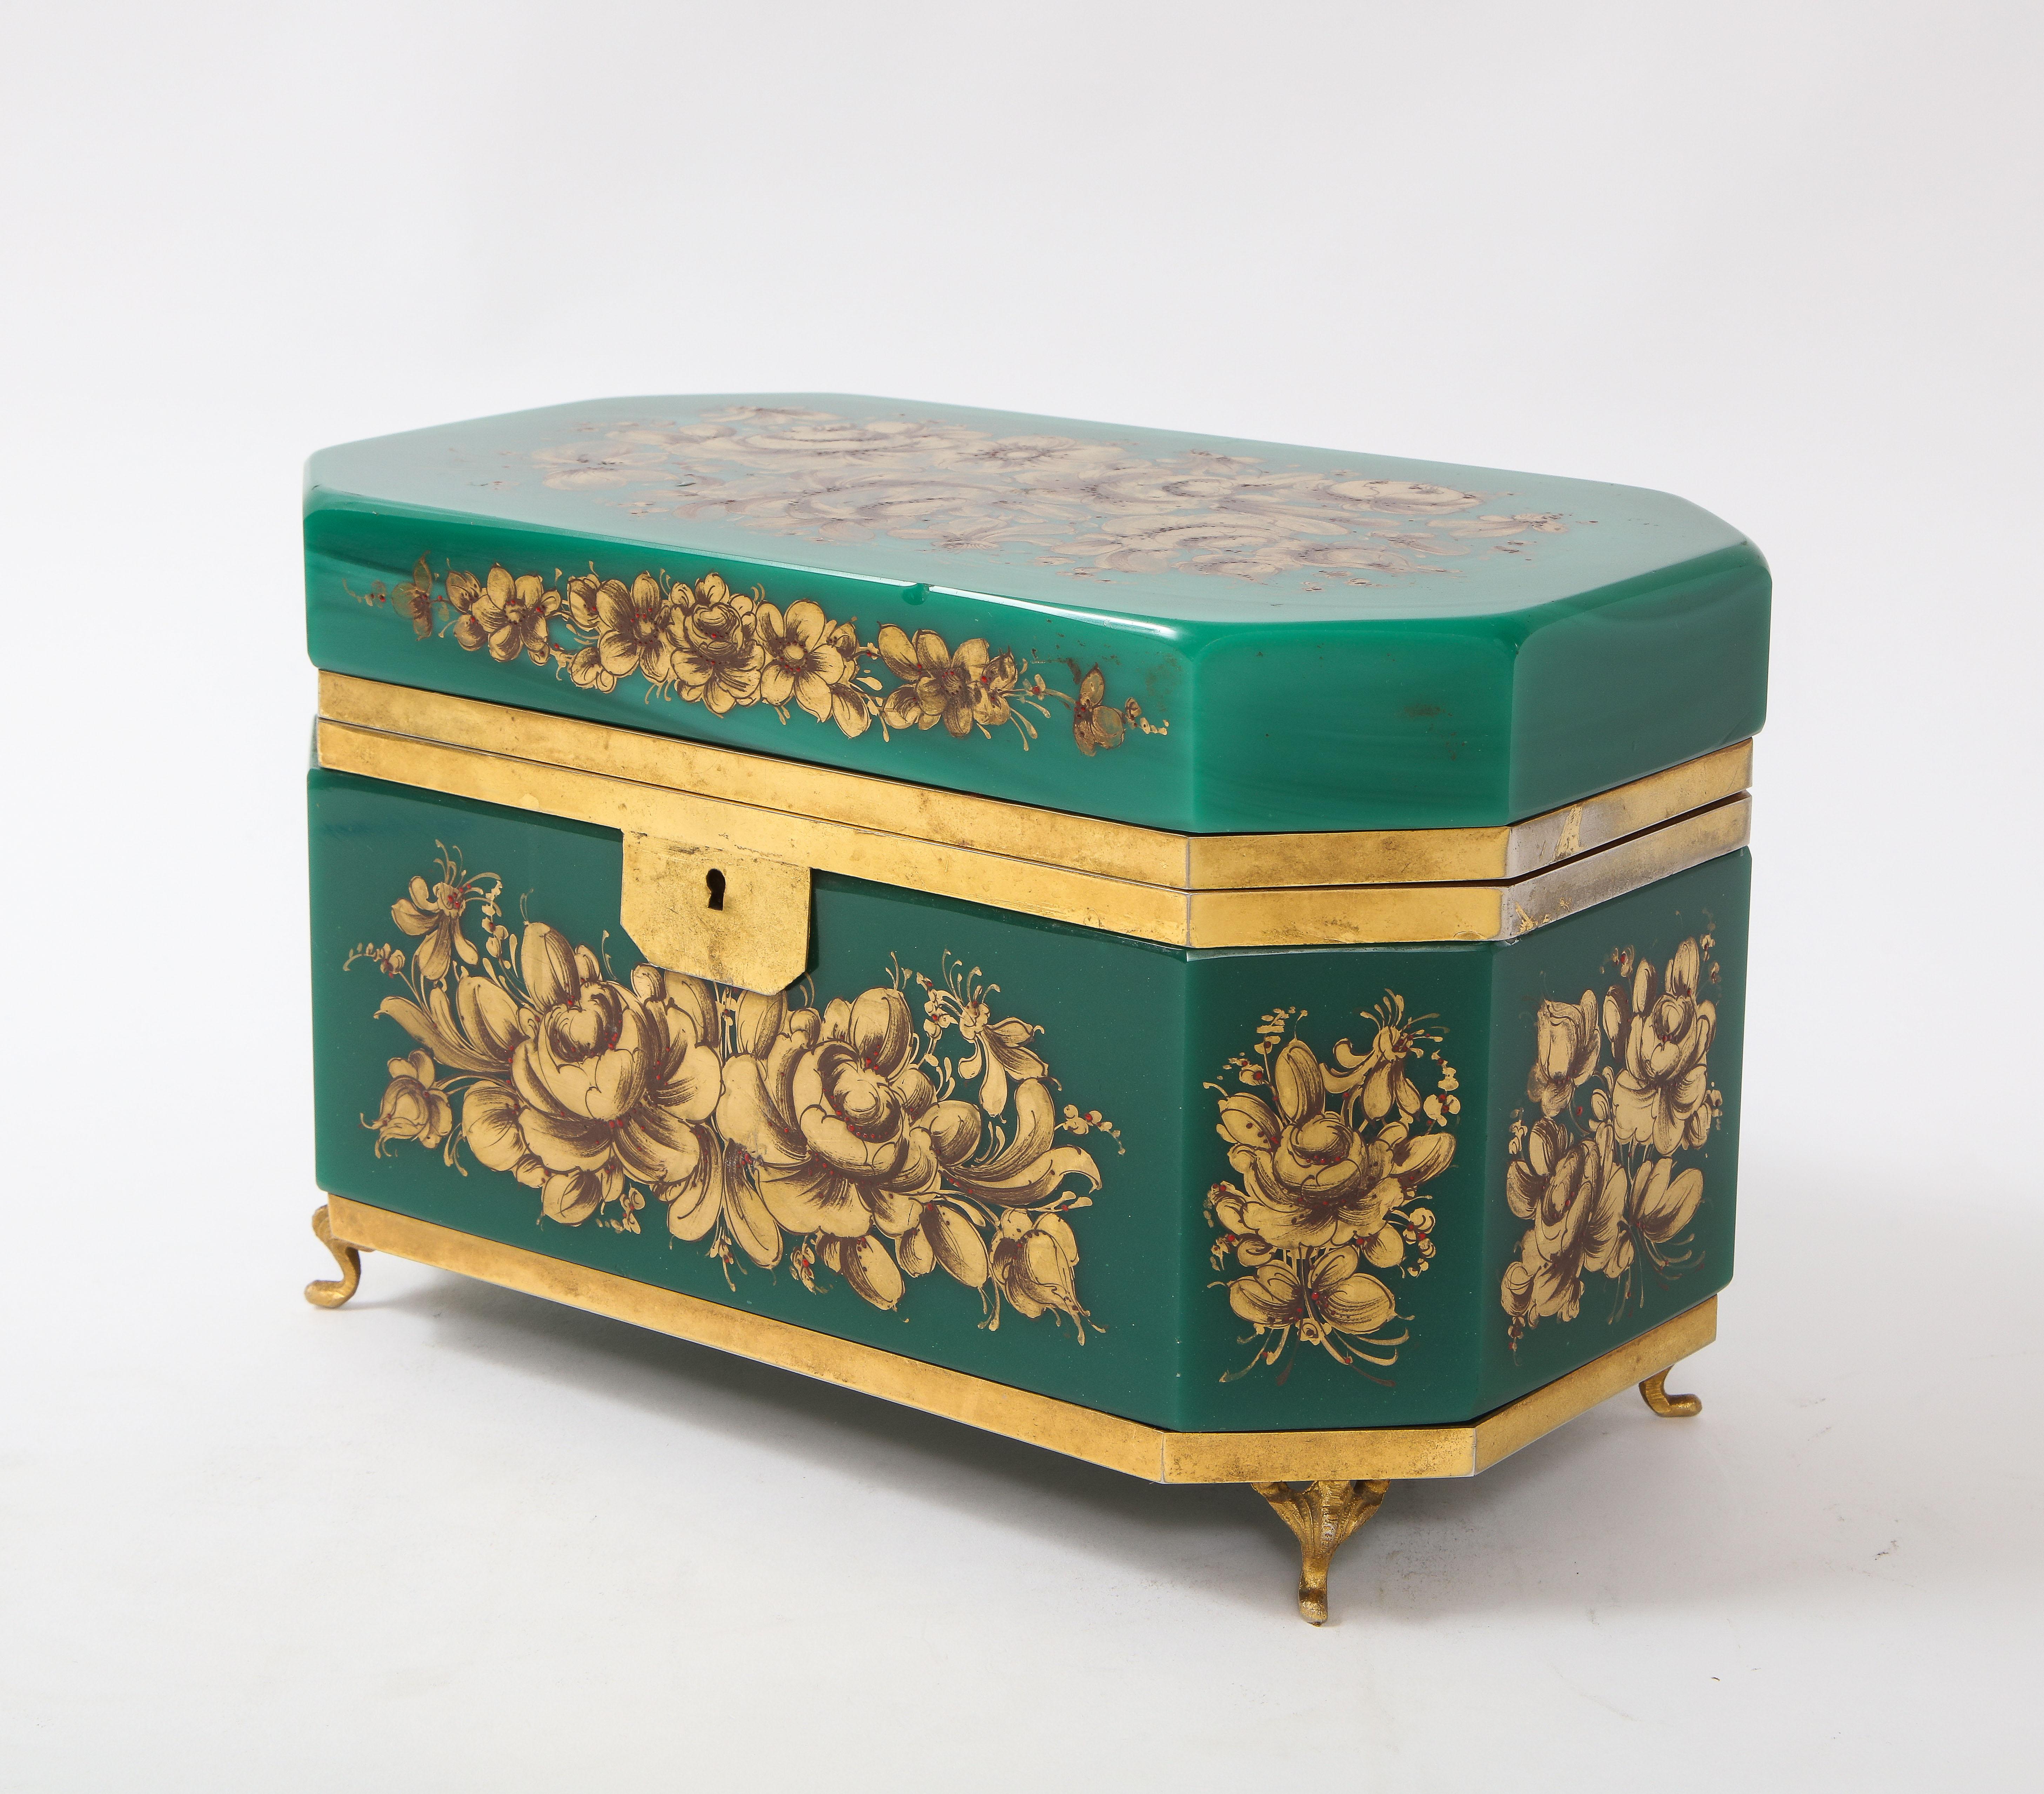 An extremely large 19th century Louis XVI Style French doré bonze mounted green spinach jade color opalescent opaline and doré bronze mounted jewelry box adorned with raised 24-karat gold décor. This box is truly amazing in both size and appearance.